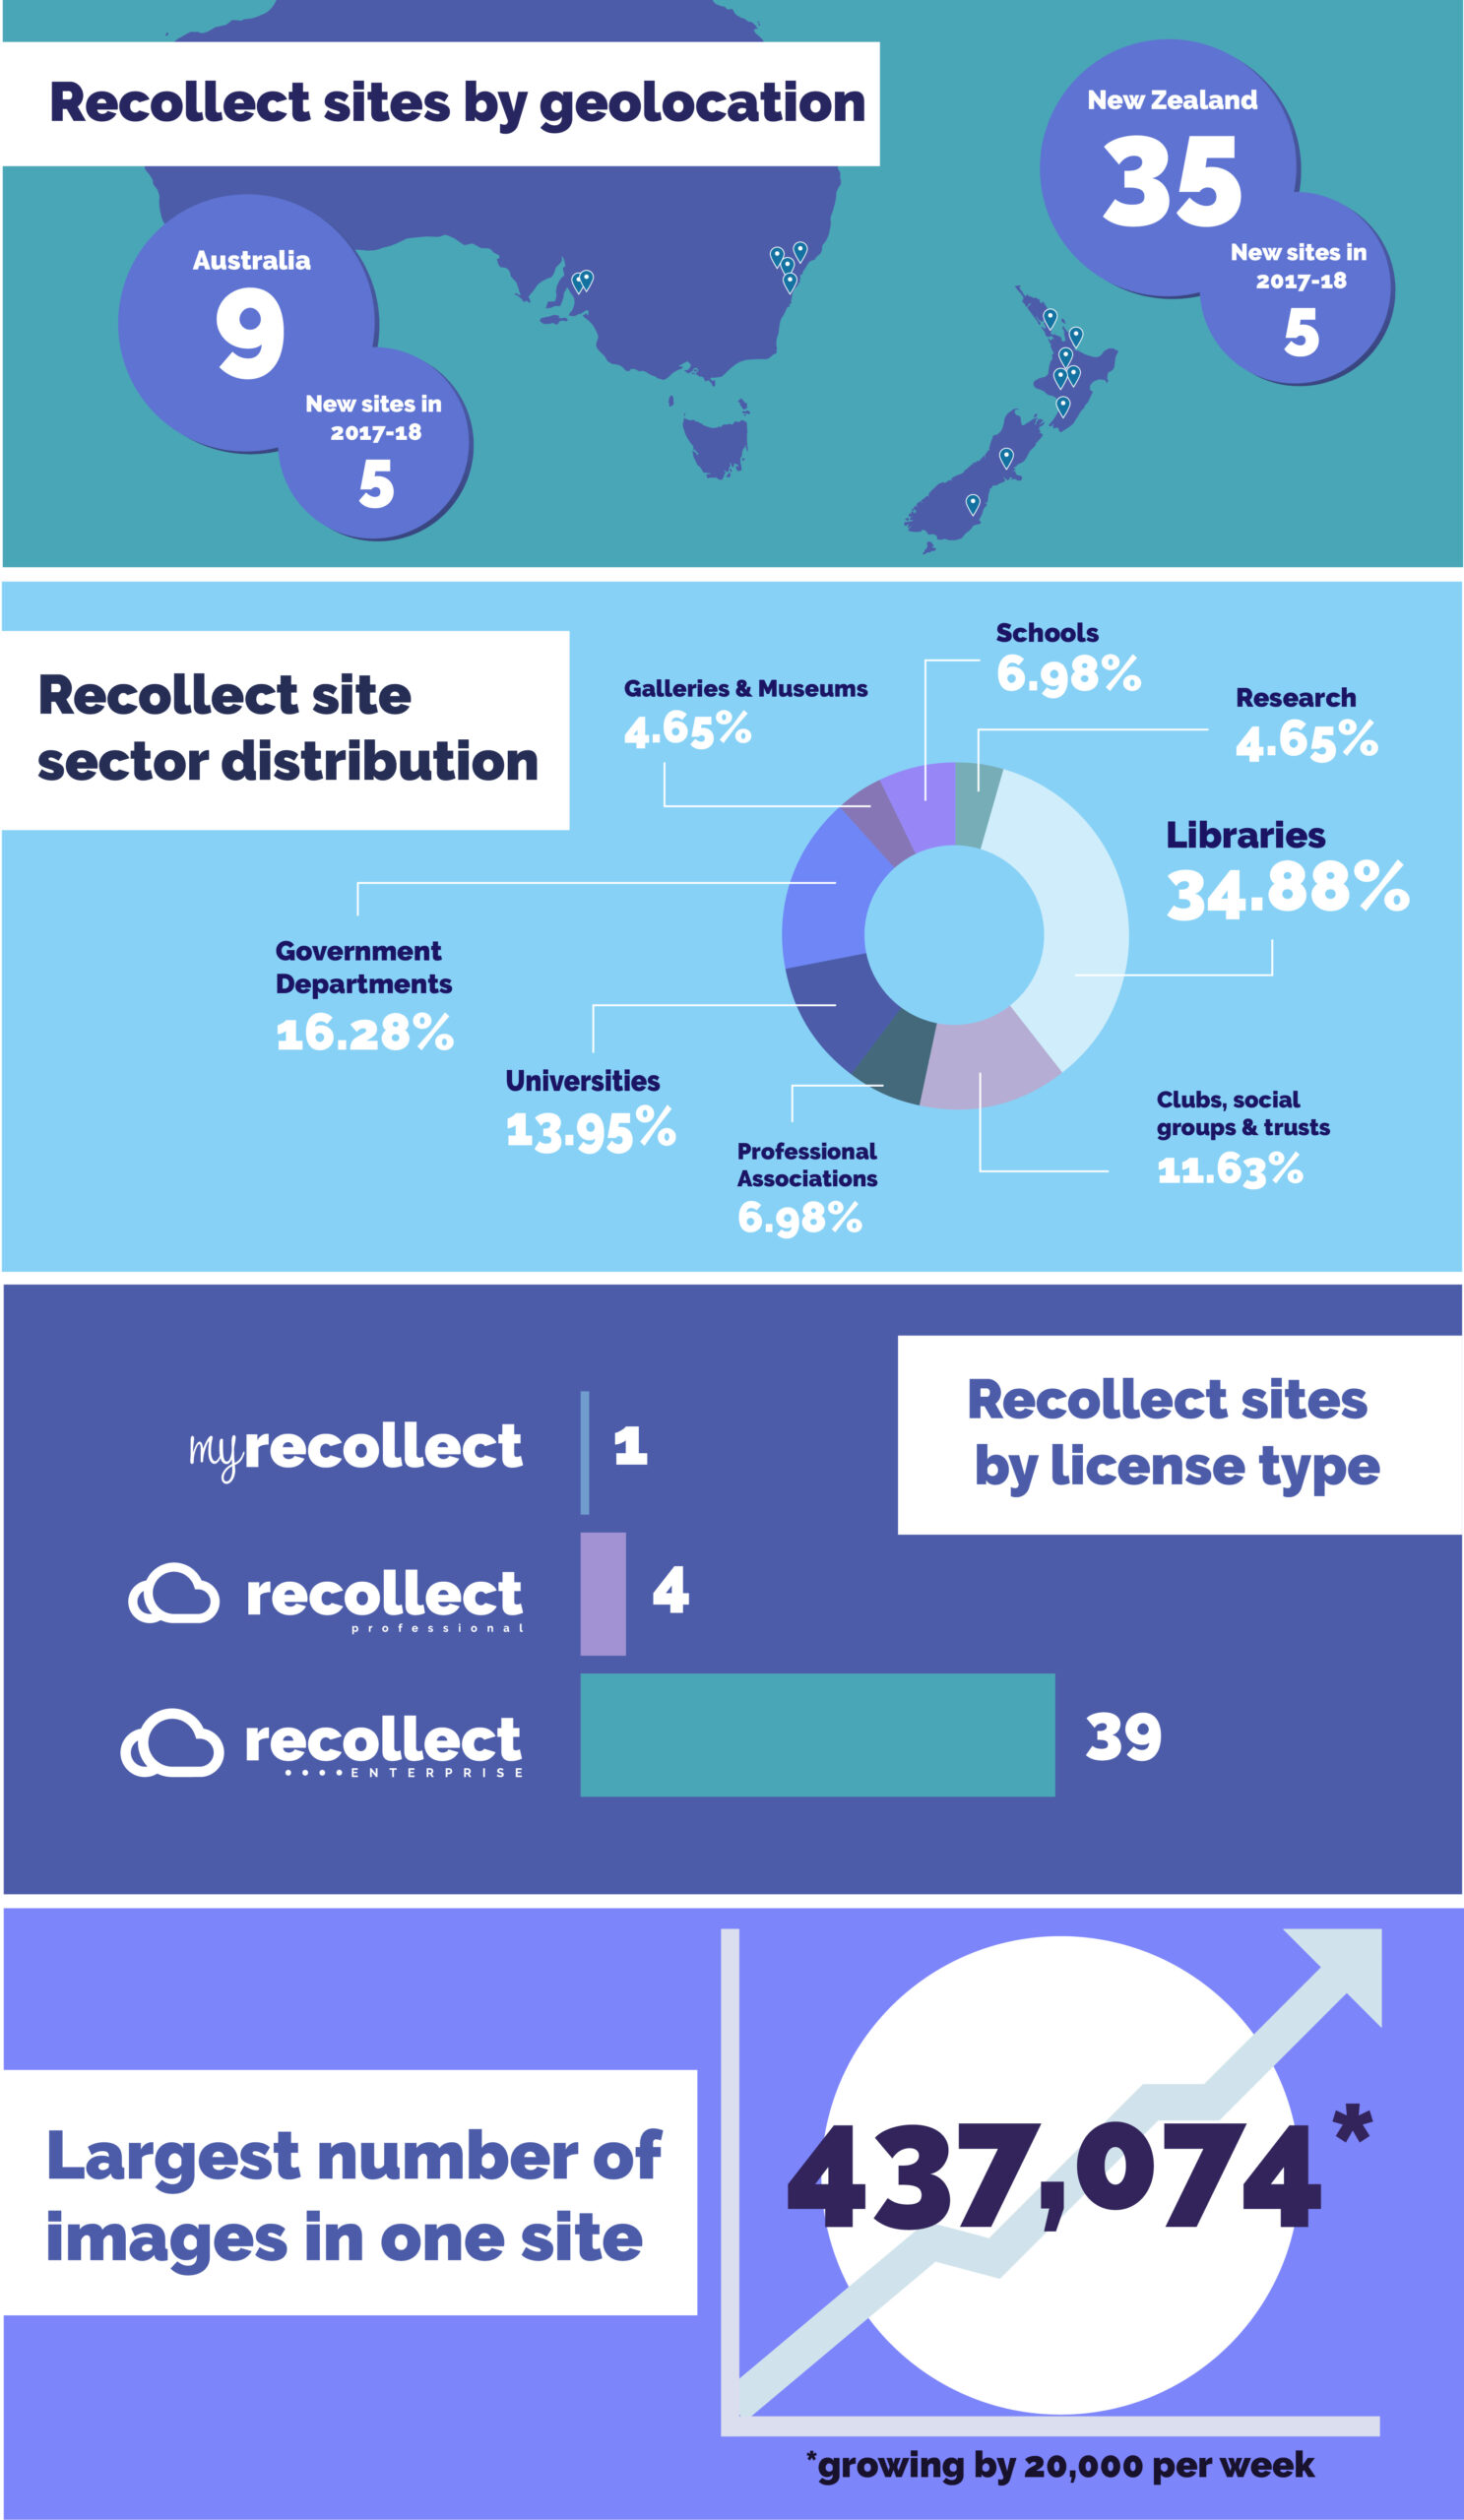 Recollect Statistics as at March 2018